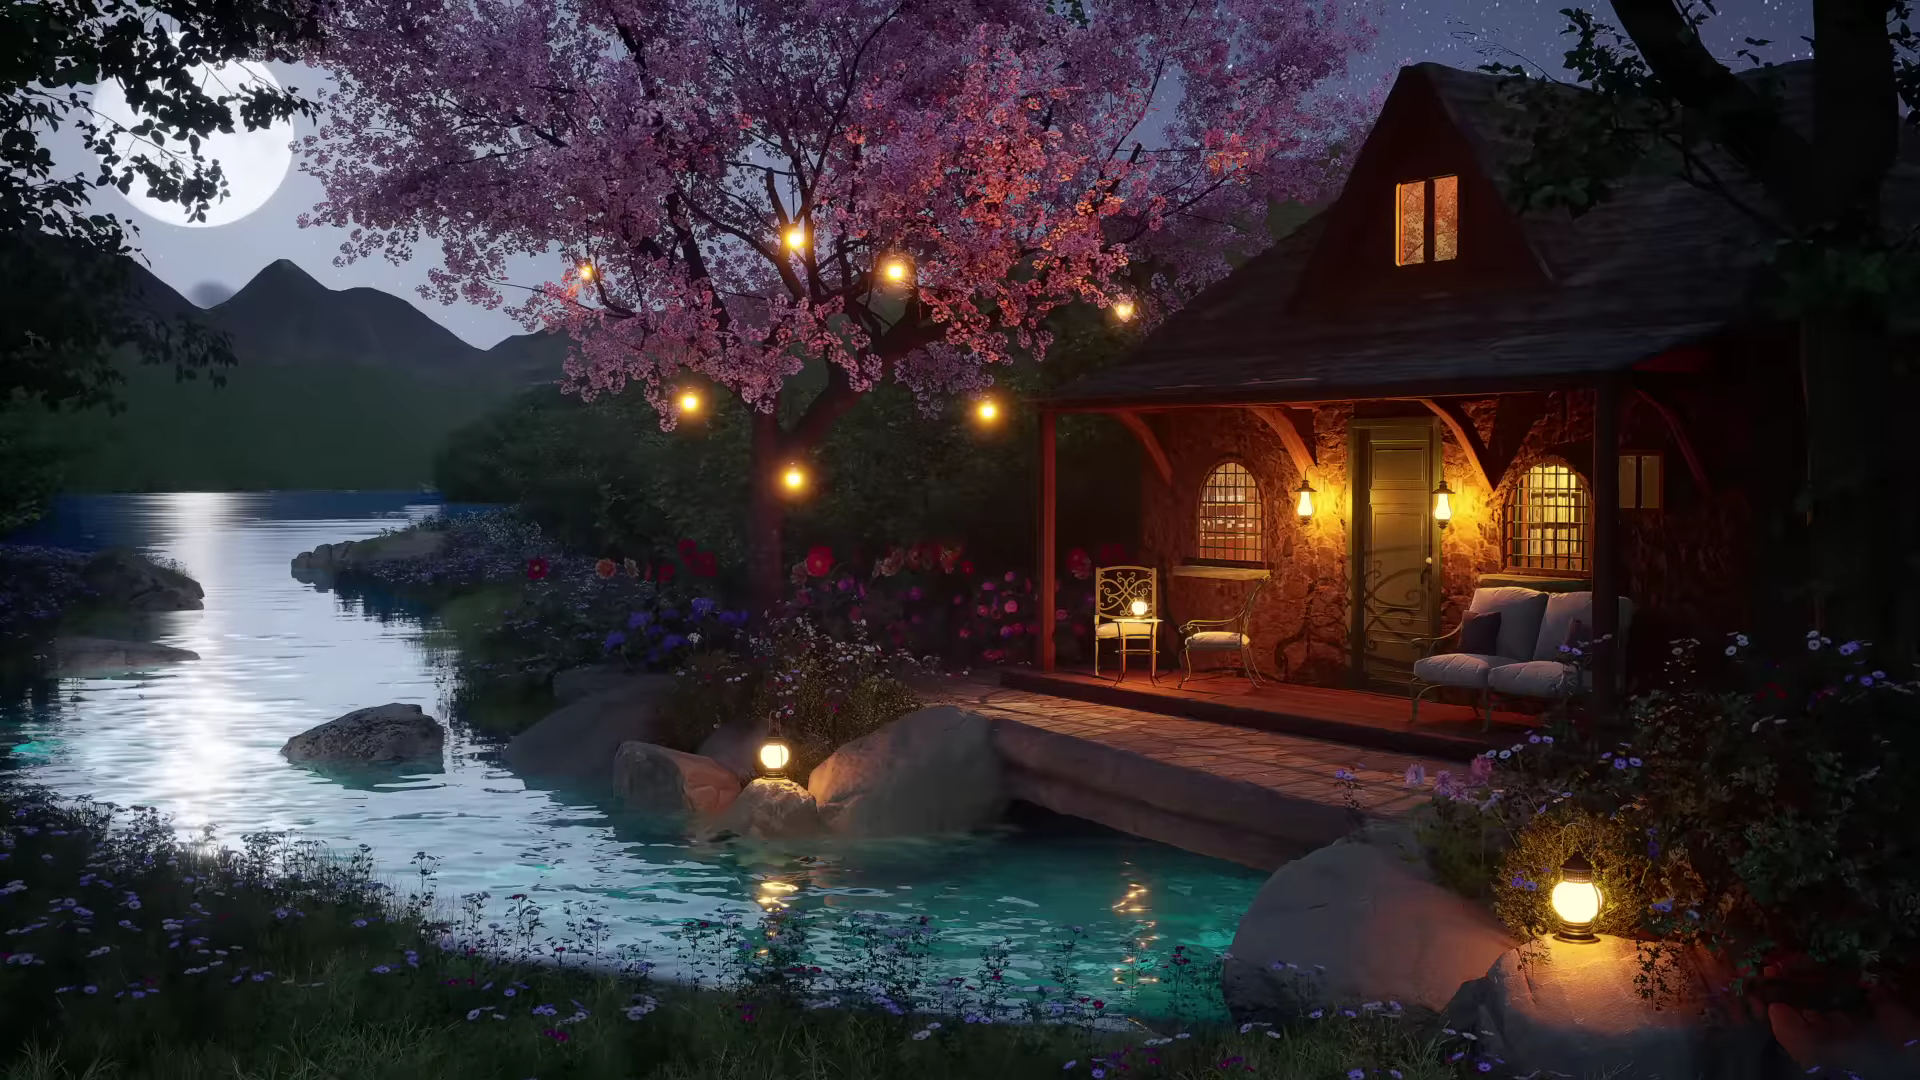 General 1920x1080 river house lights trees night Moon water flowers